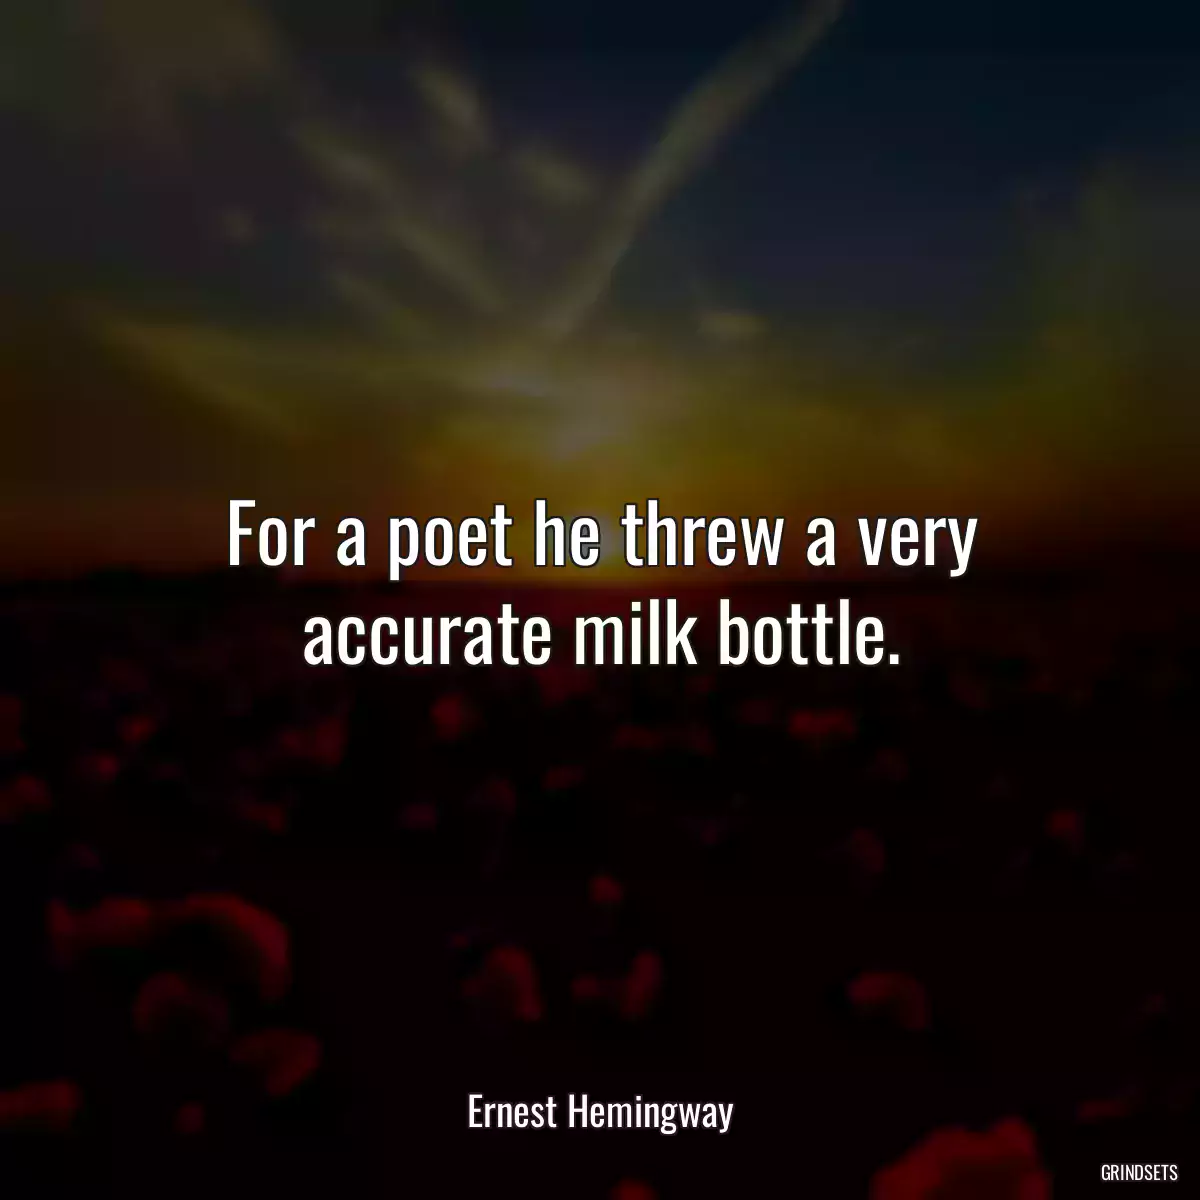 For a poet he threw a very accurate milk bottle.